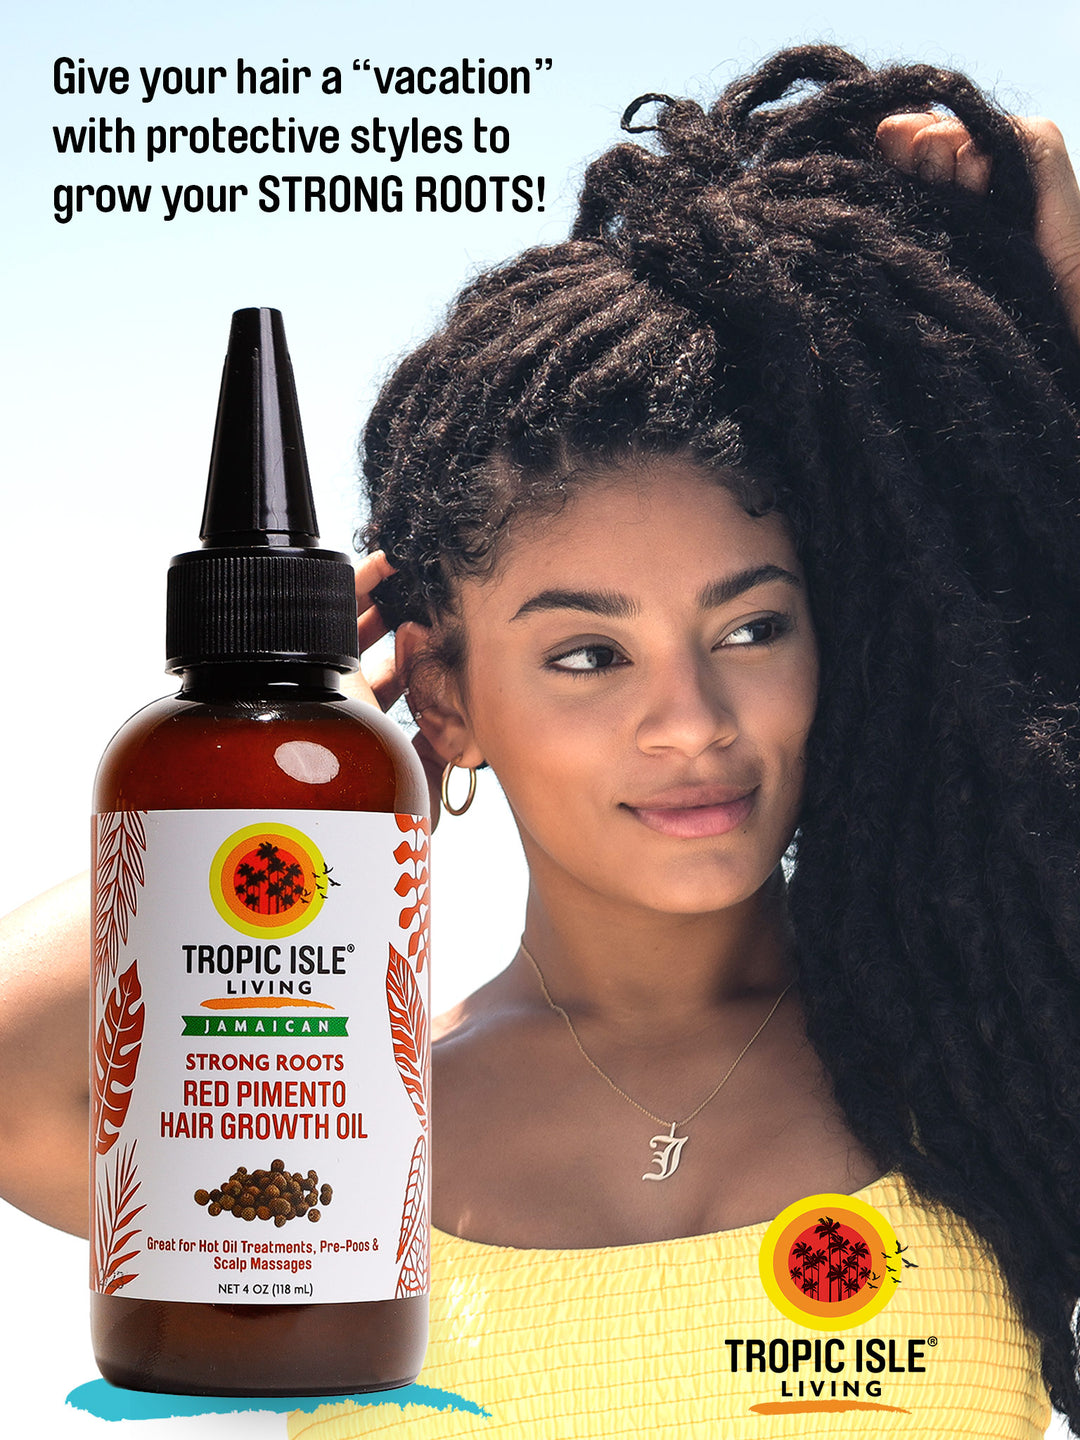 Tropic Isle Living Strong Roots Red Pimento Hair Growth Oil 4oz for protective styles